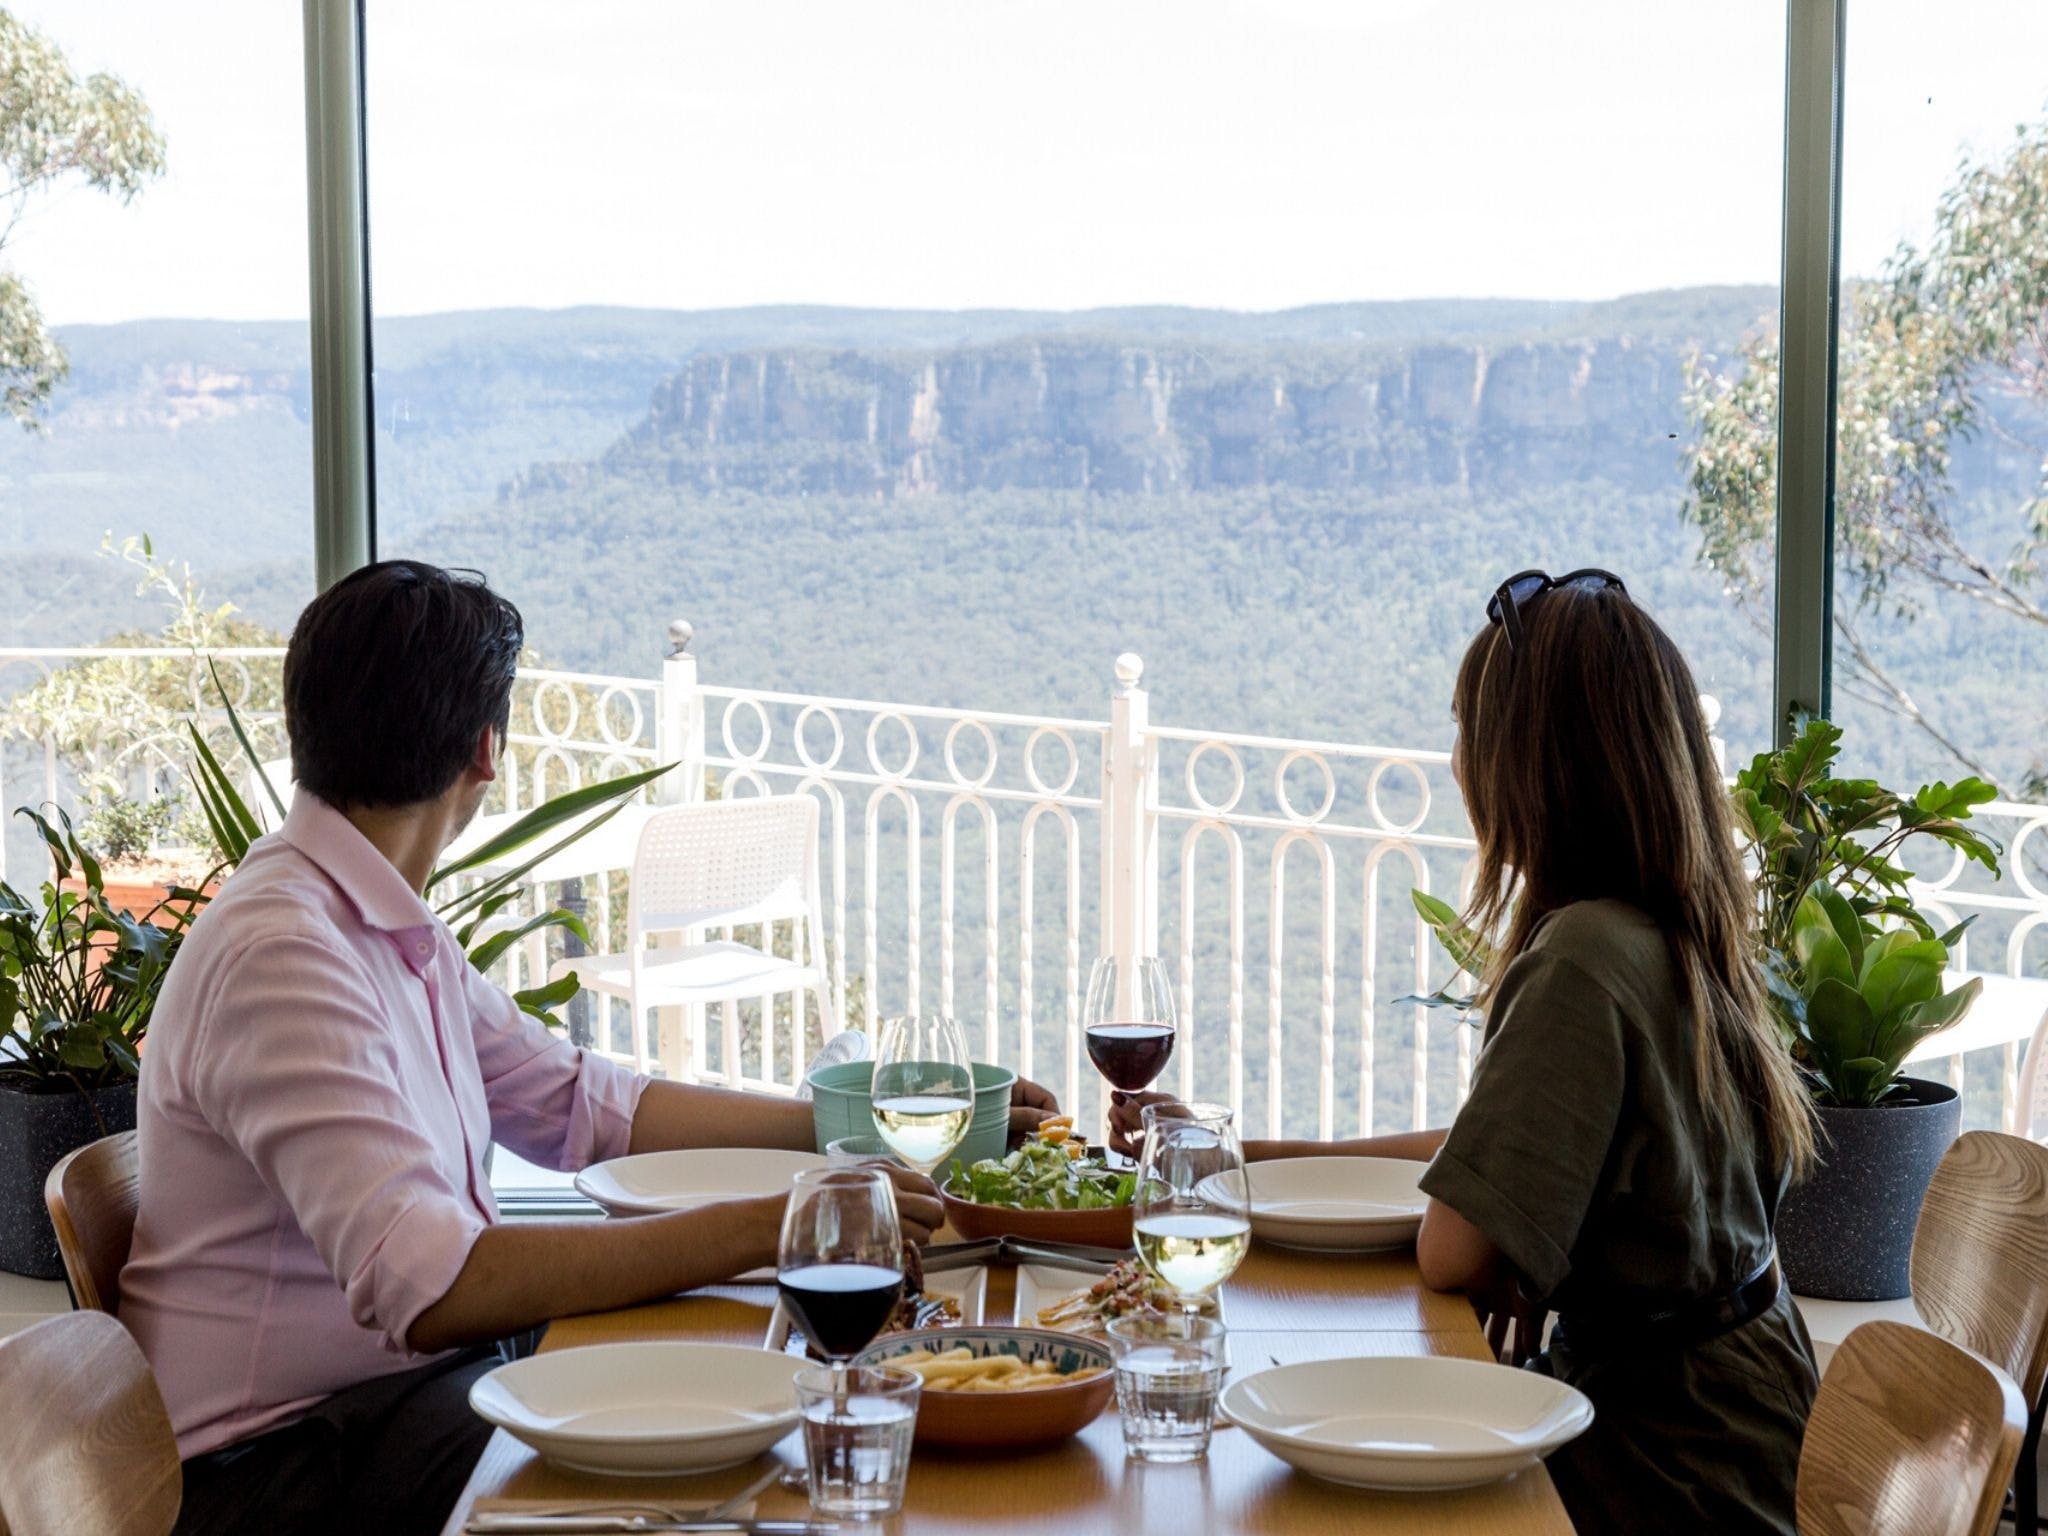 Christmas Day Lunch at The Lookout Echo Point - WA Accommodation